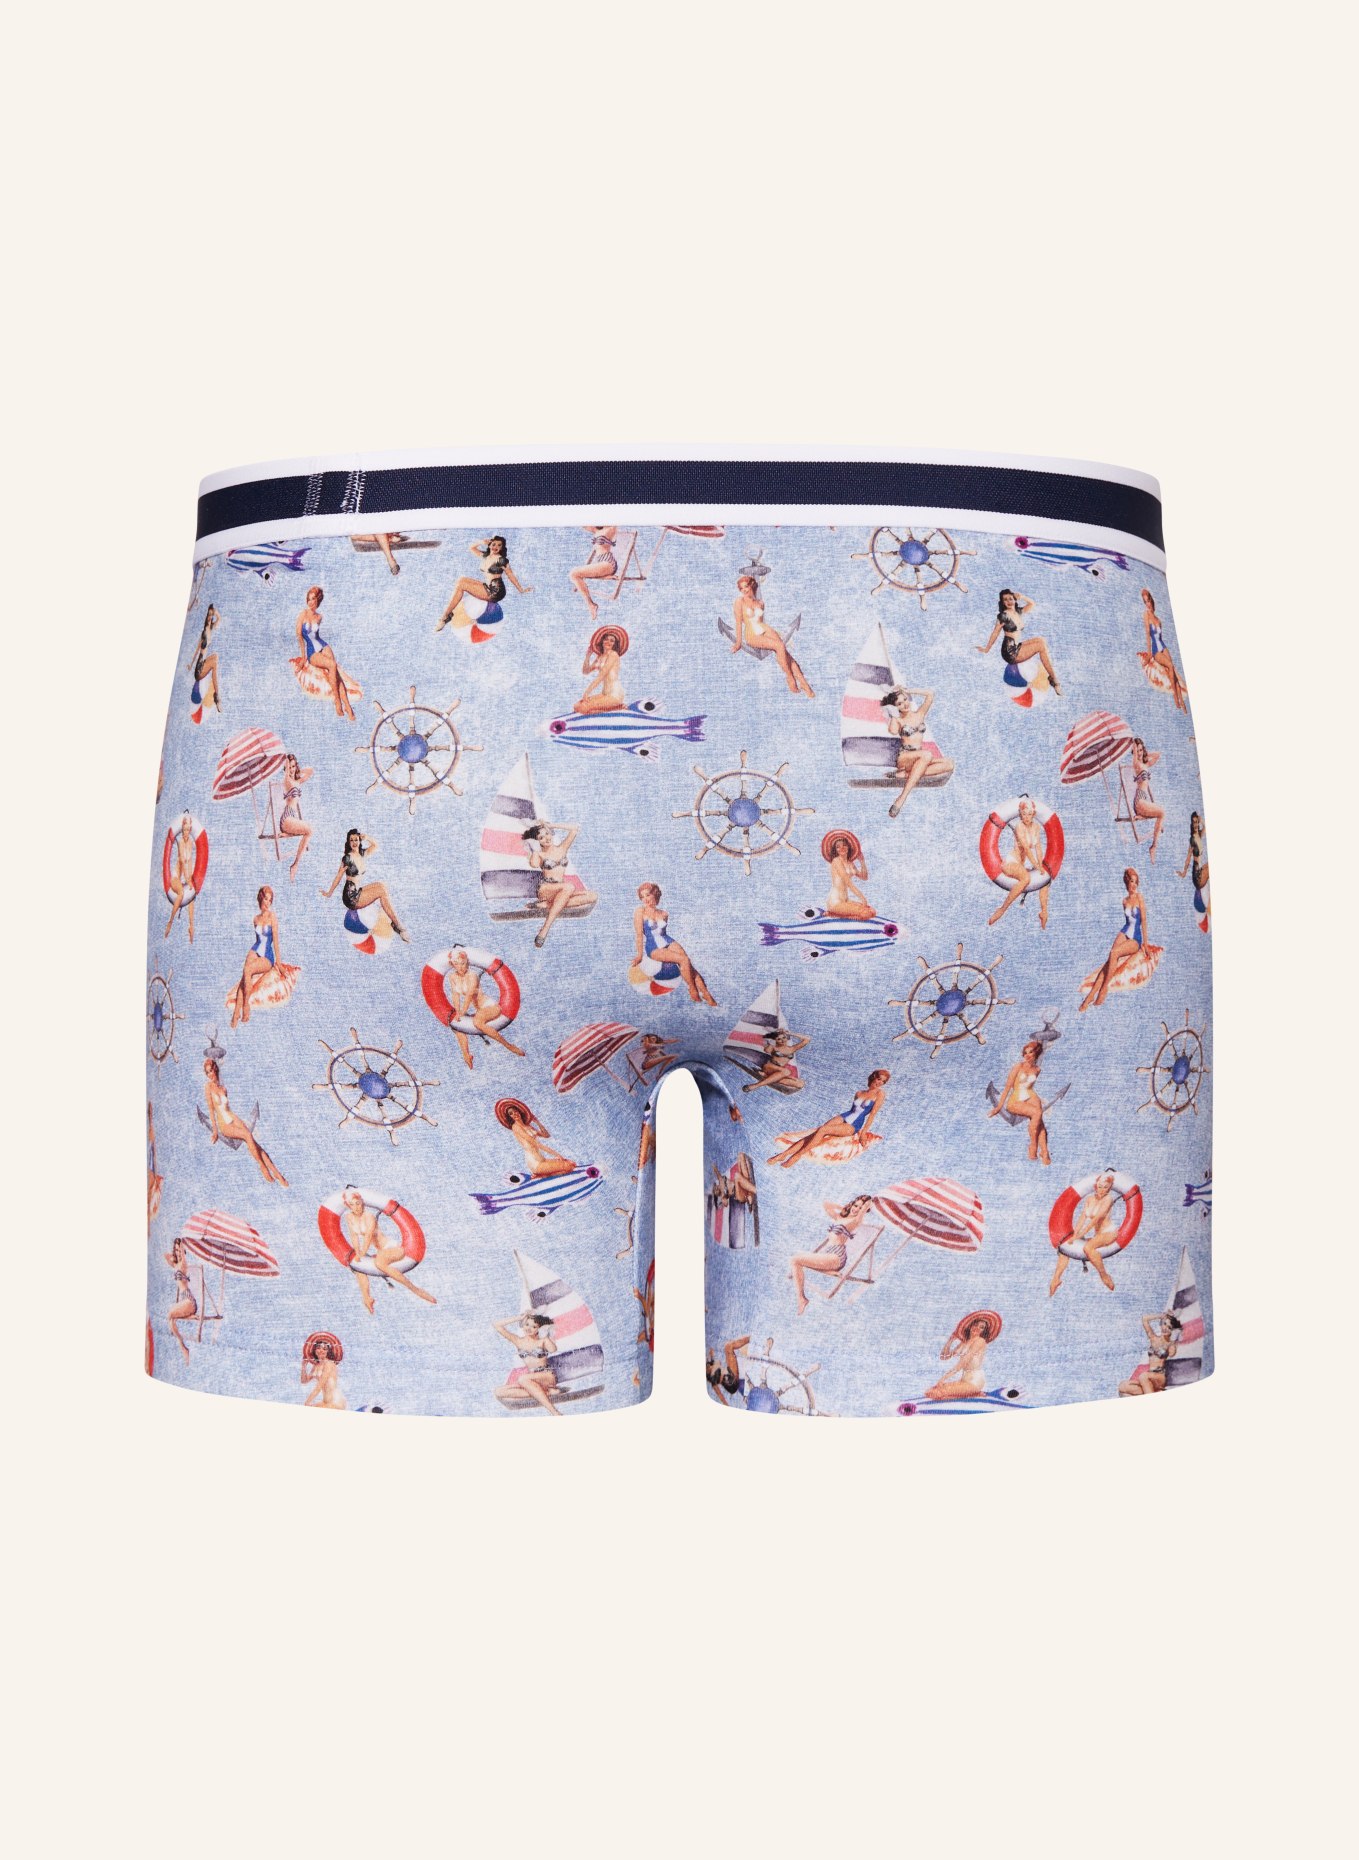 mey Boxer shorts series PIN UP GIRLS, Color: LIGHT BLUE (Image 2)